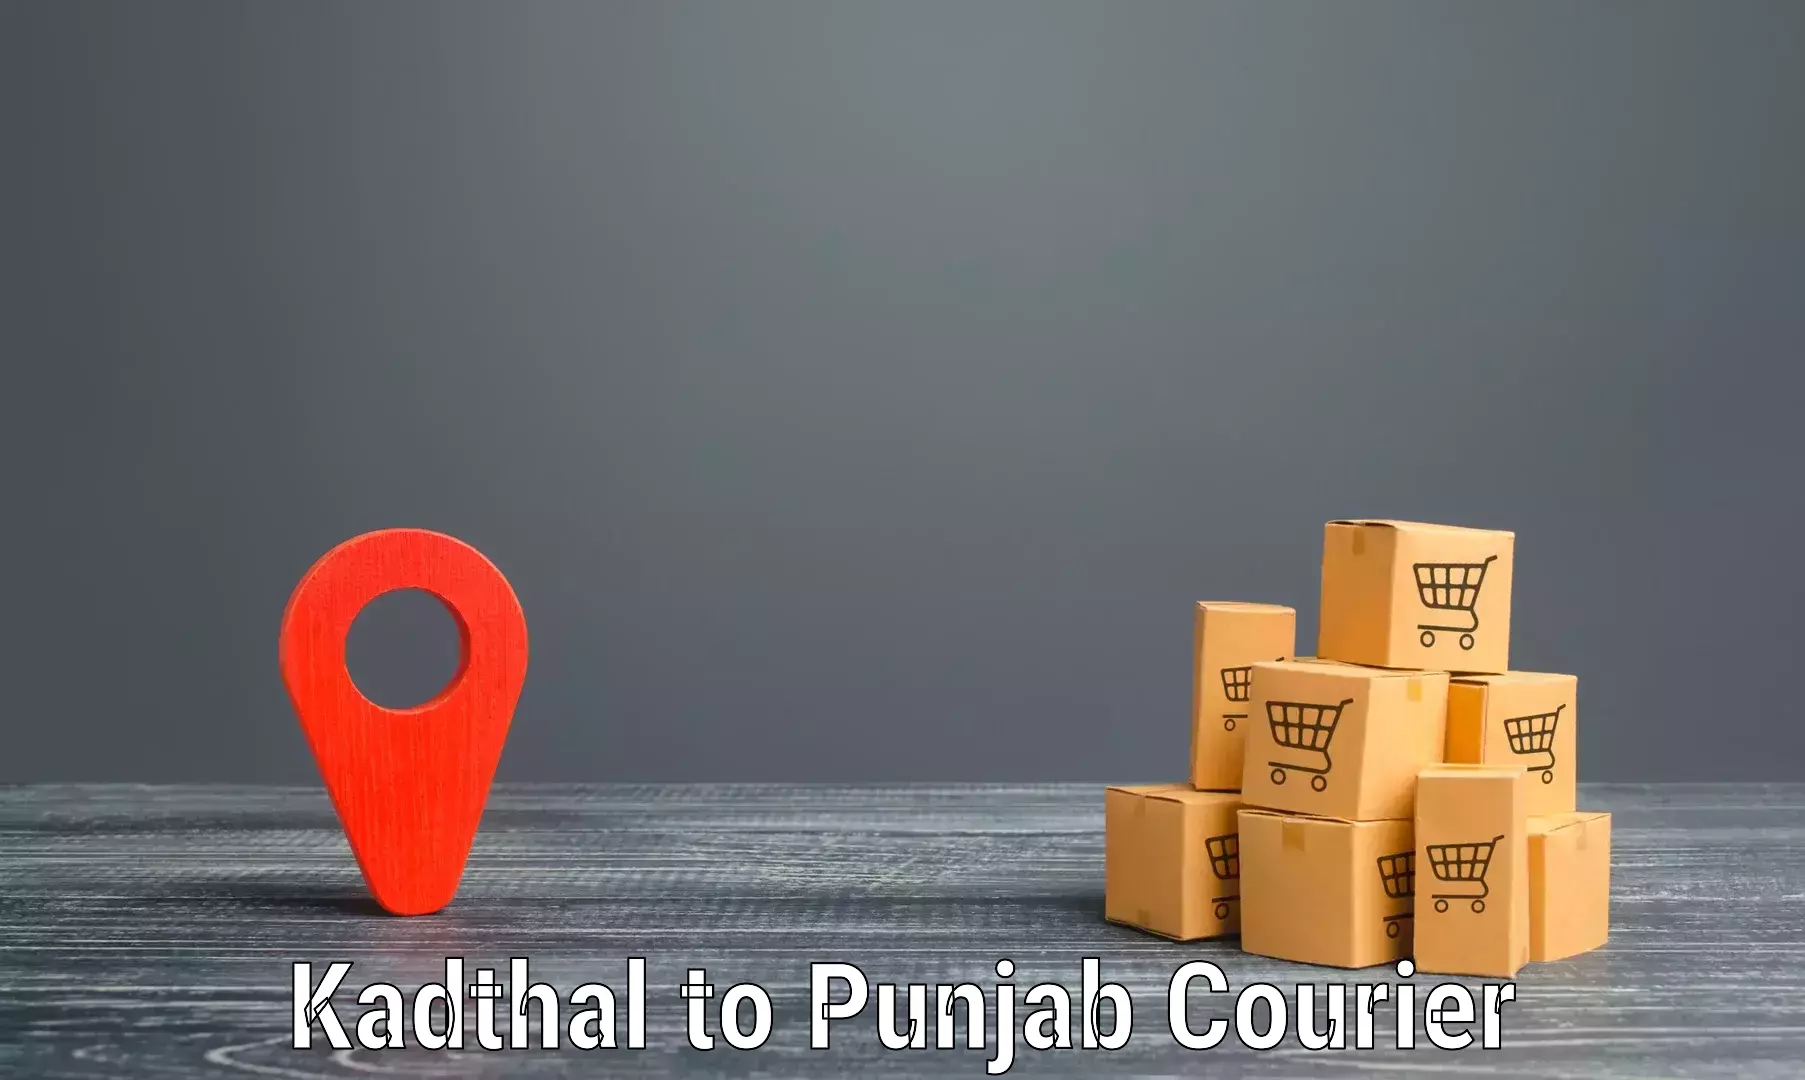 Advanced courier platforms Kadthal to Mehta Chowk